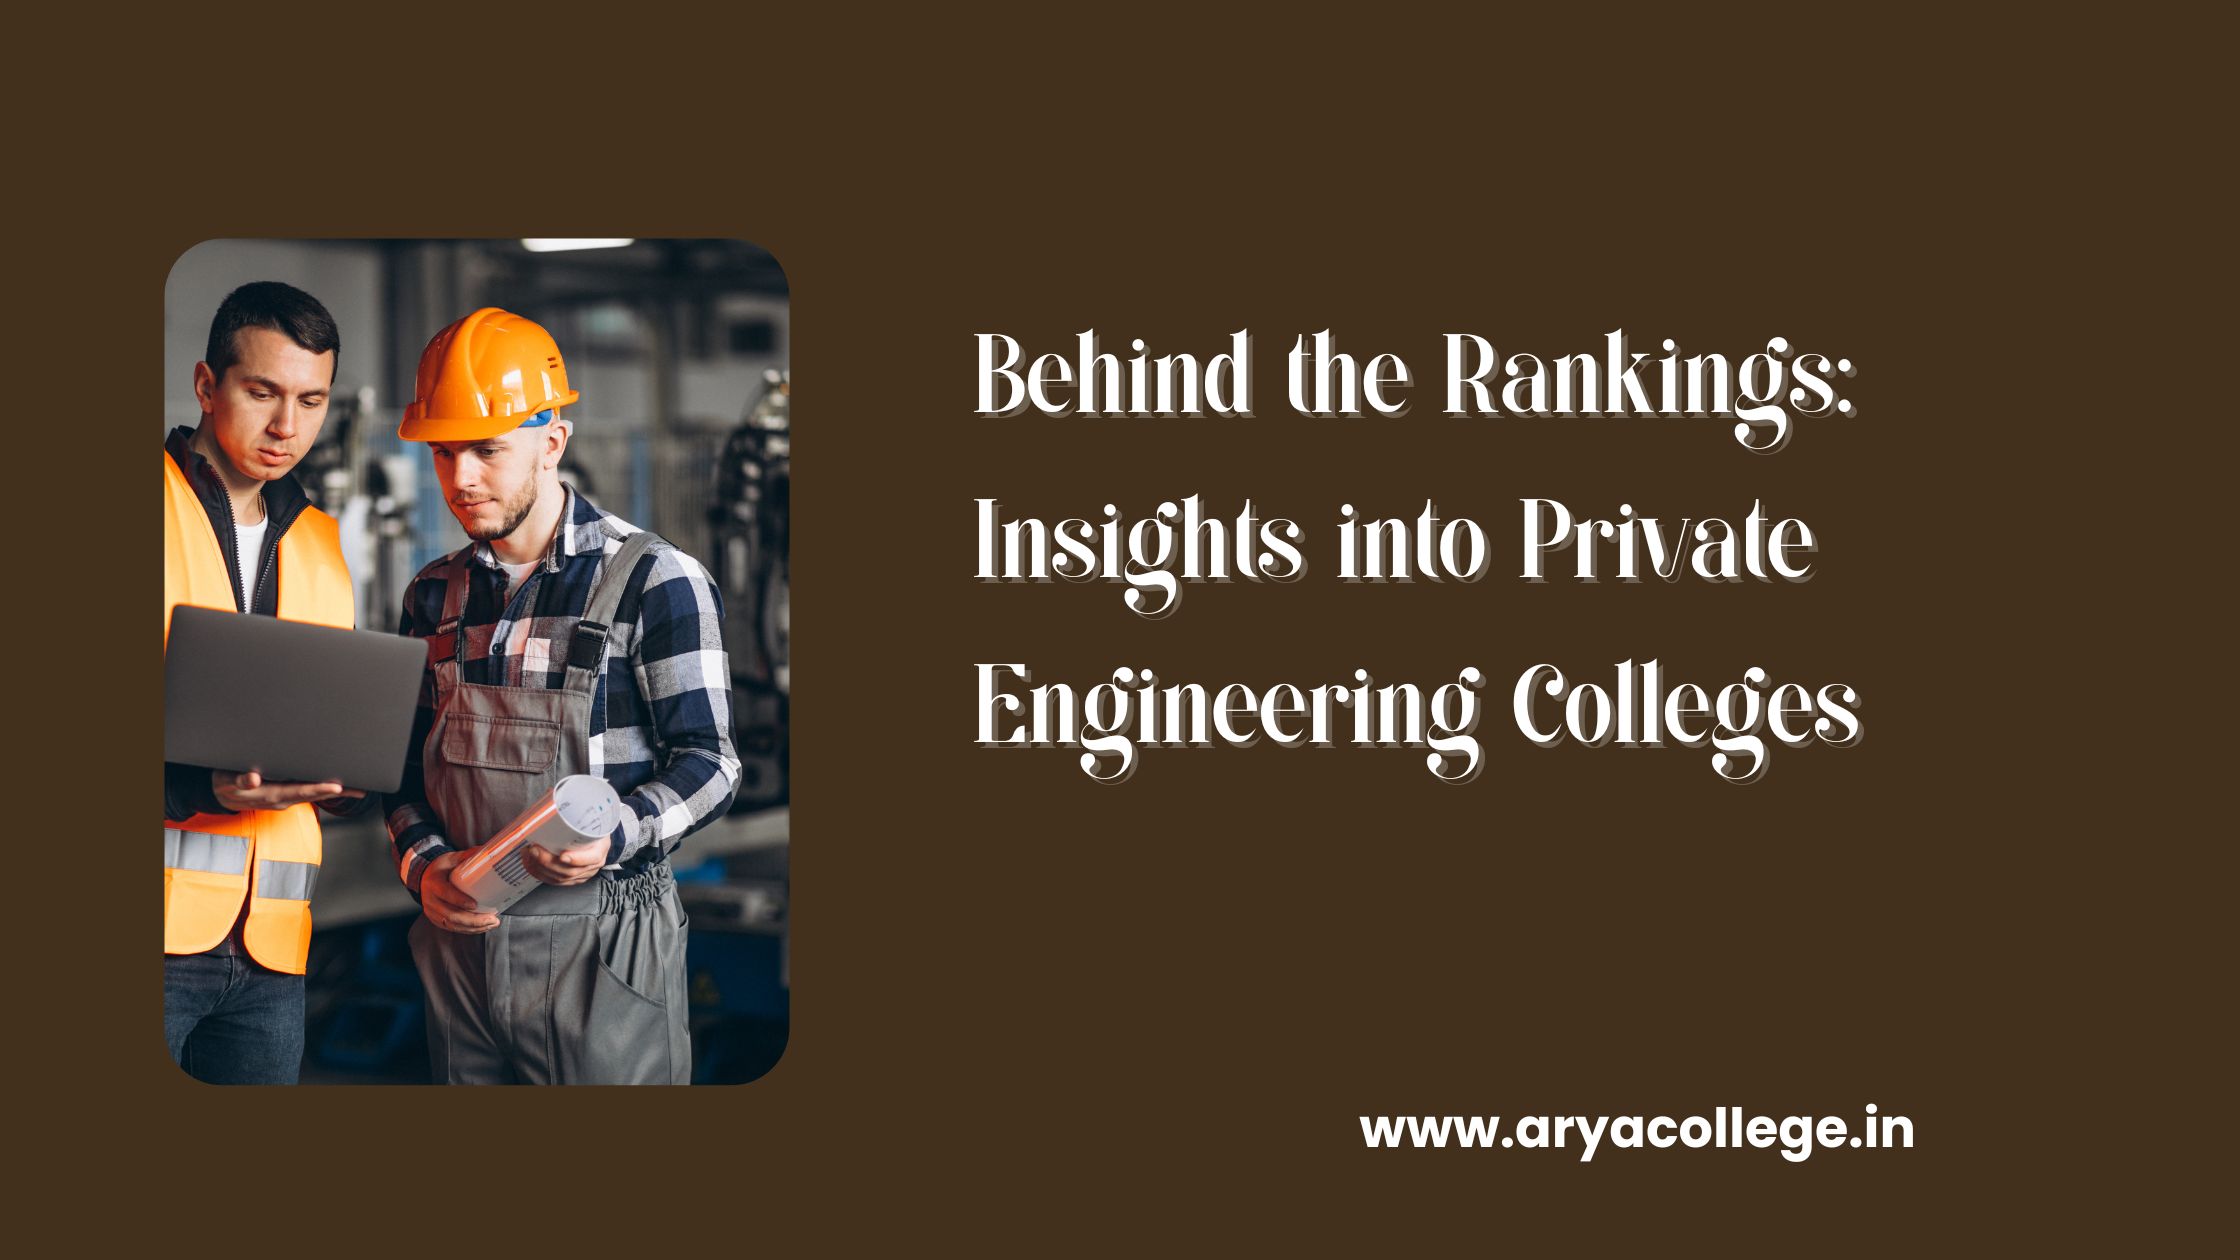 Behind the Rankings: Insights into Private Engineering Colleges